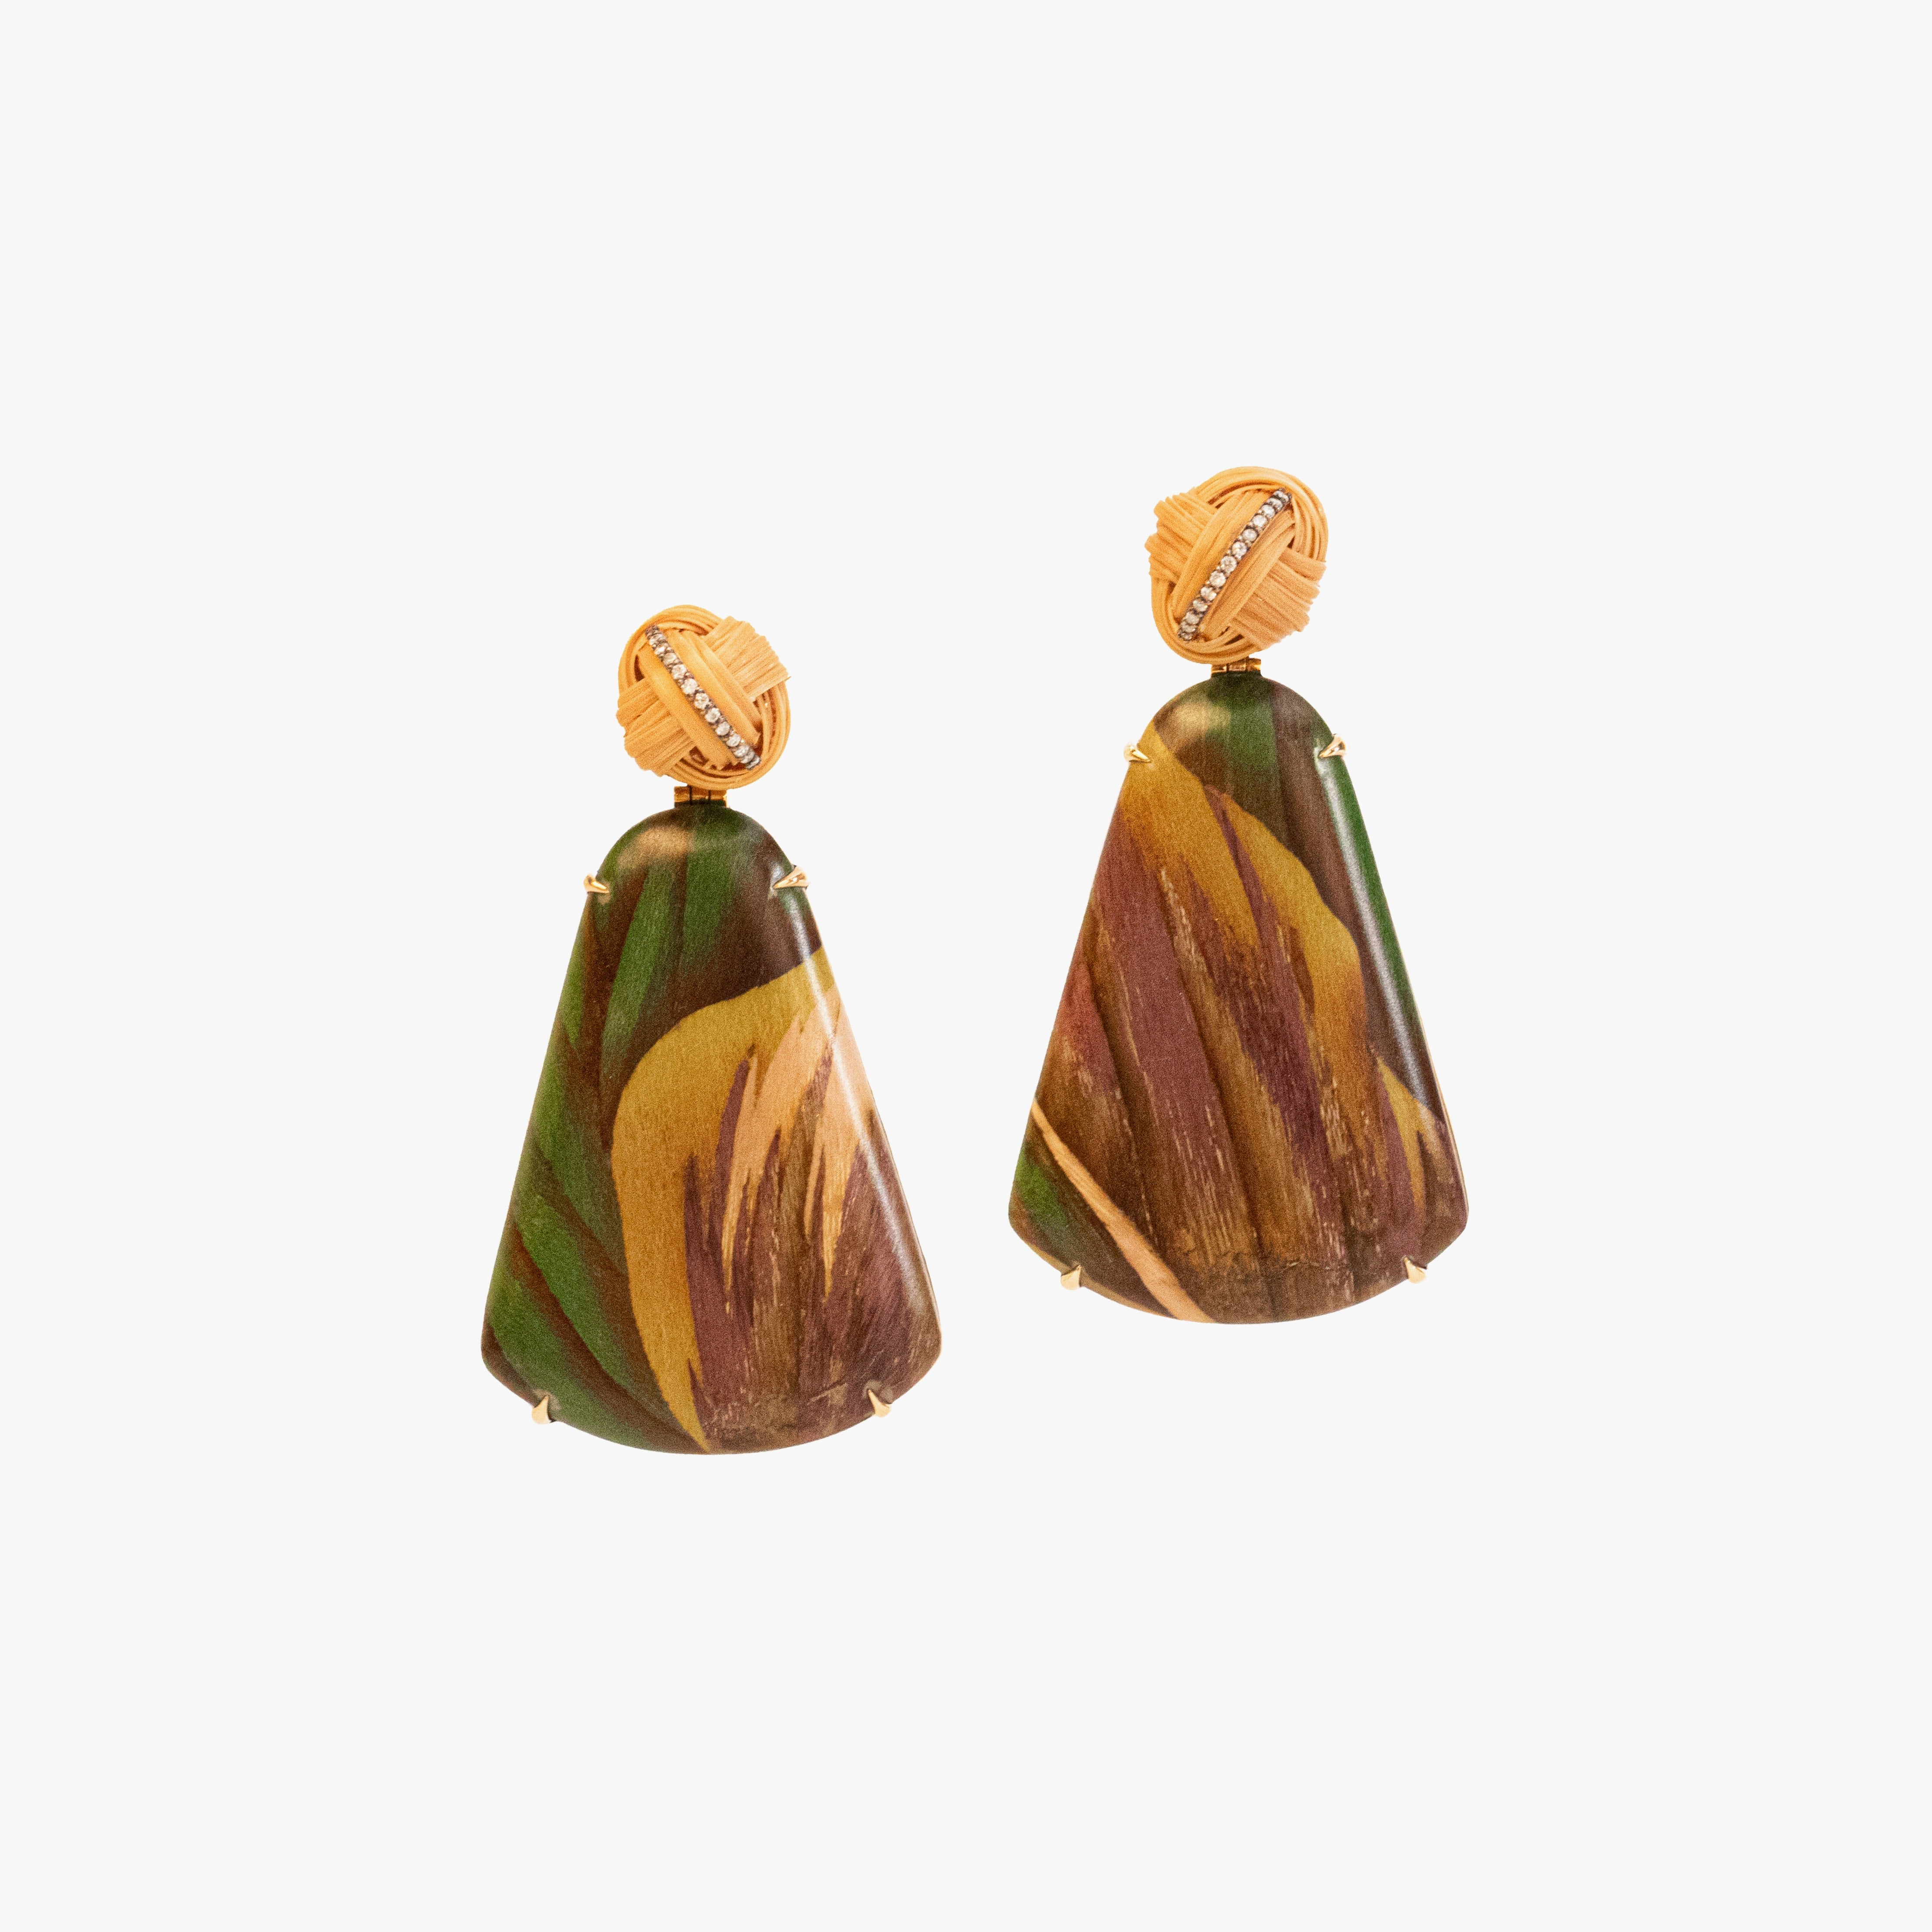 Marquetry Earrings with Bamboo